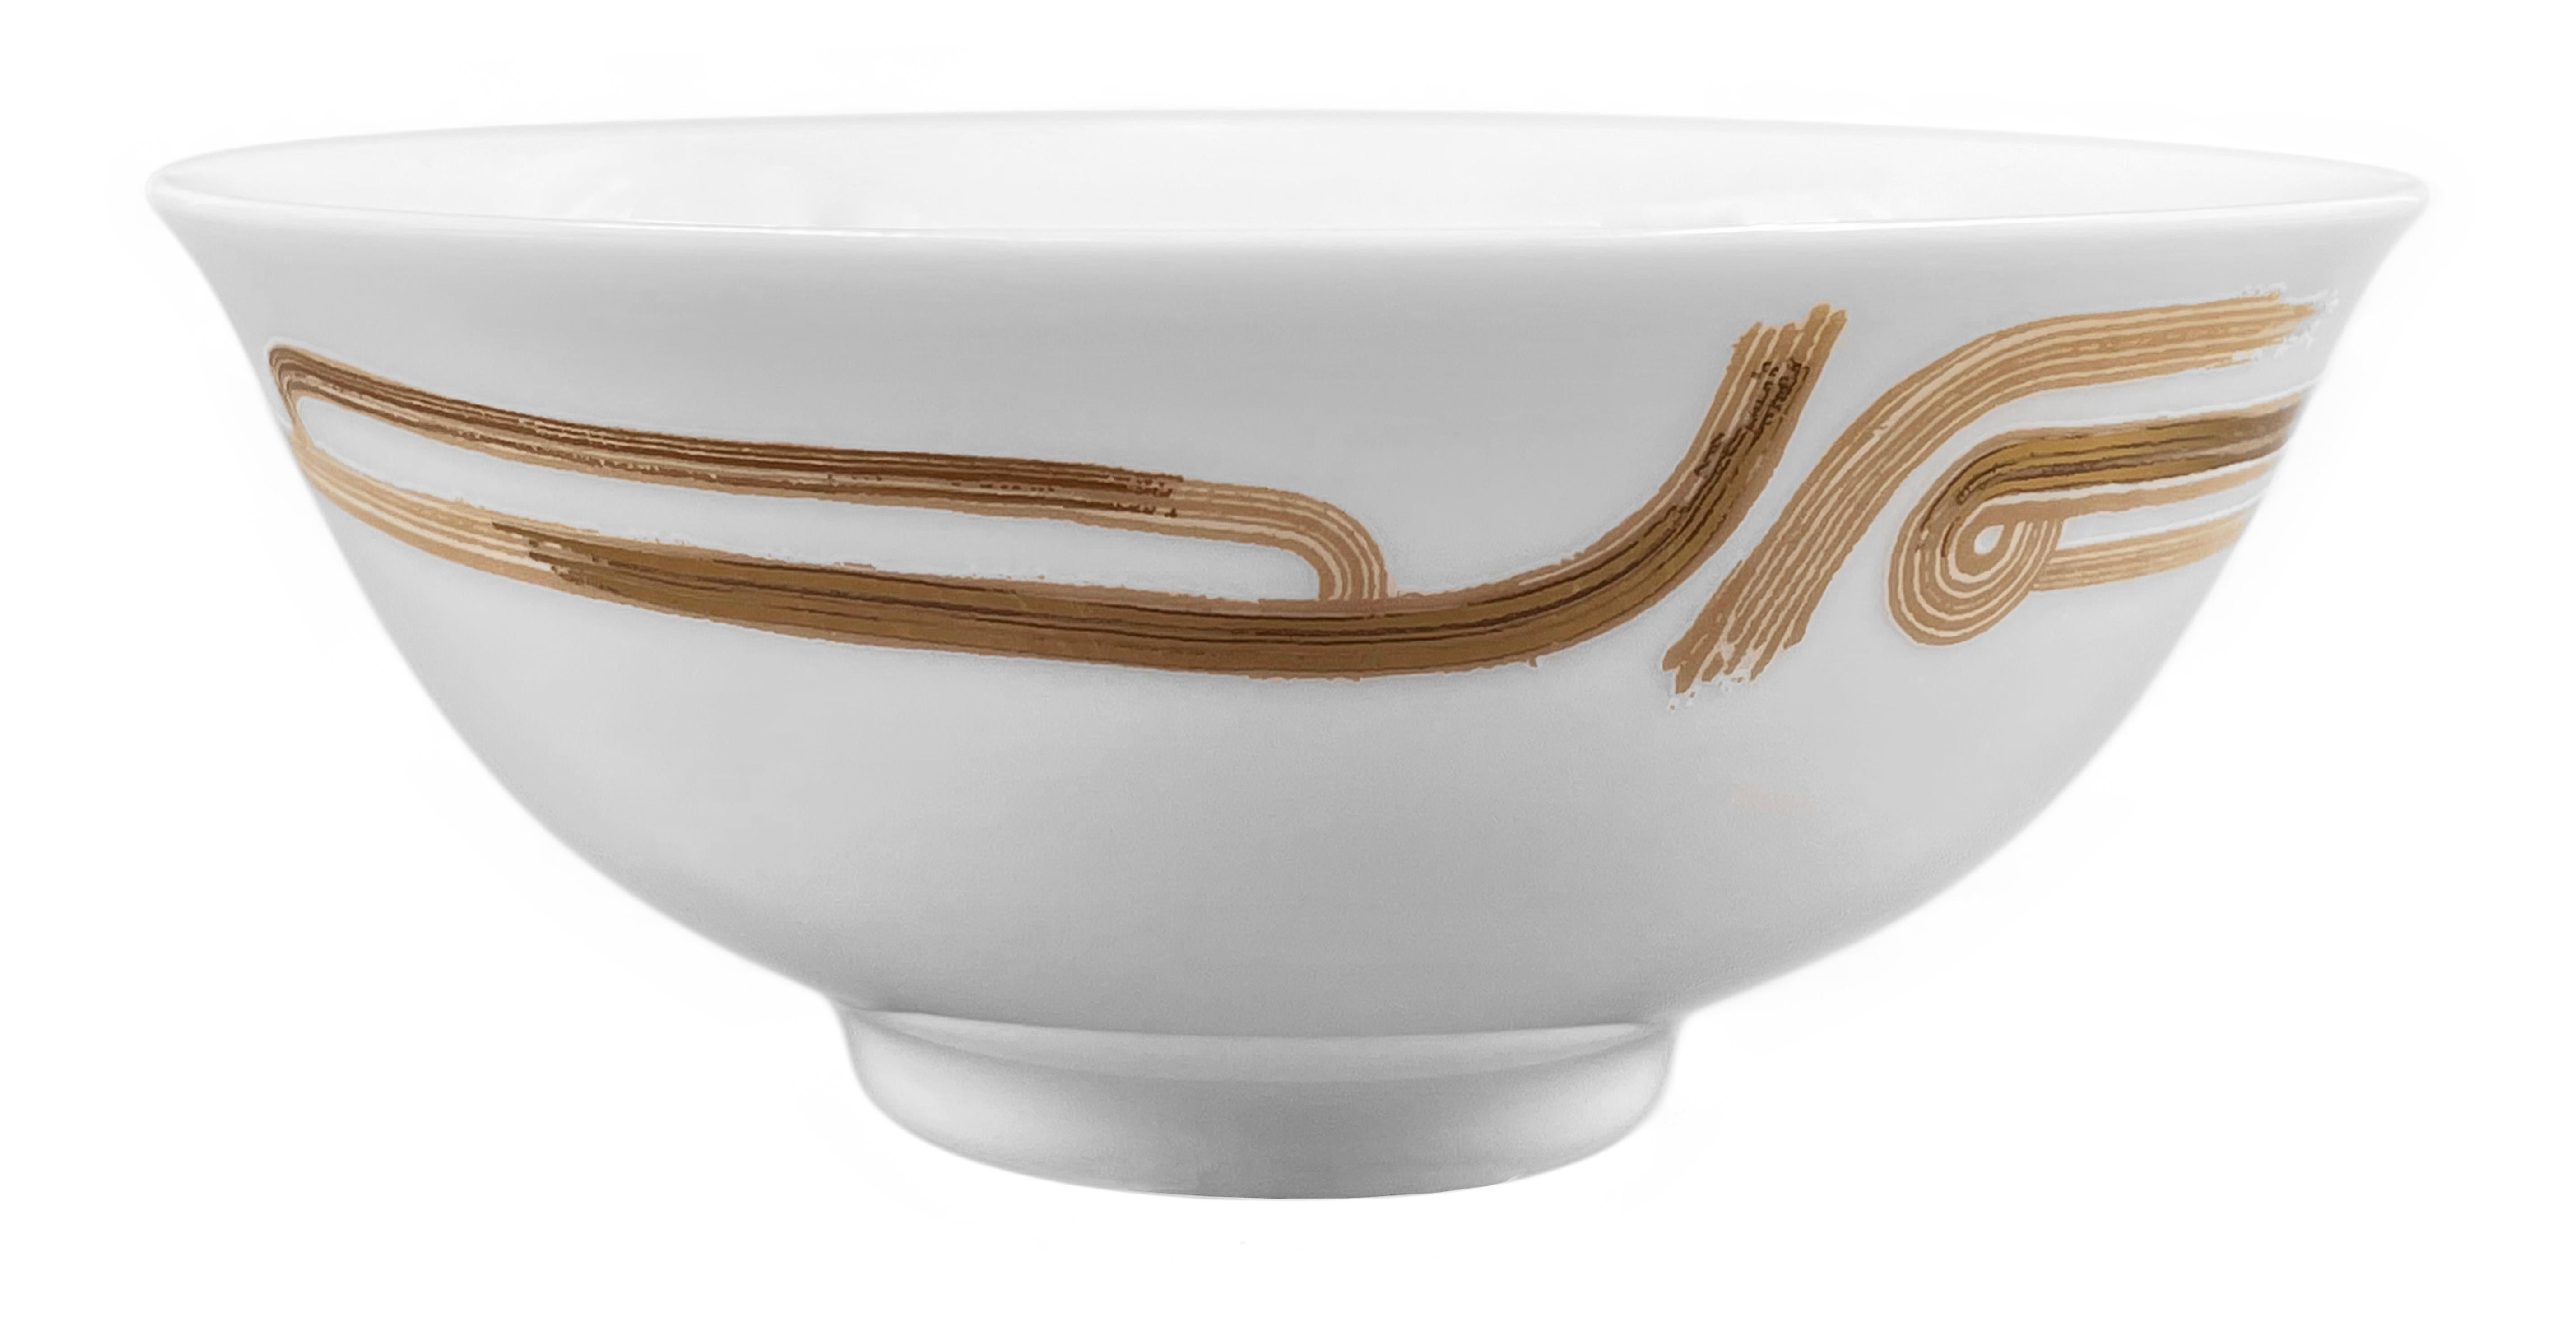 Description: Chinese rice bowl (2 pieces)
Color: Beige gold
Size: 12 Ø x 5.5 H cm
Material: Porcelain and gold
Collection: Art Déco Garden

Larger quantities available upon request, with 8 weeks production time.